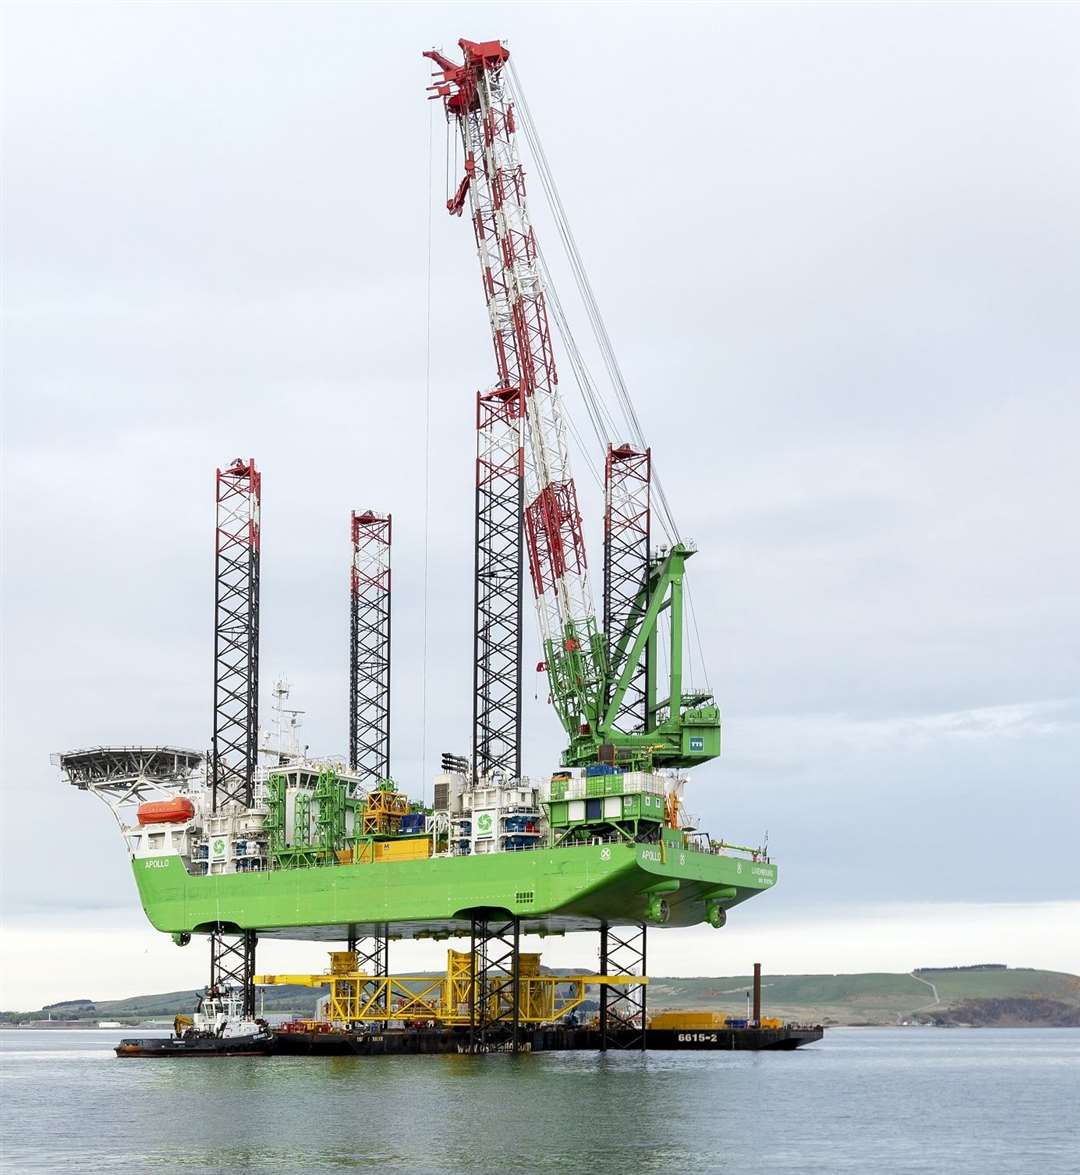 The jack-up installation vessel Apollo in the Cromarty Firth.